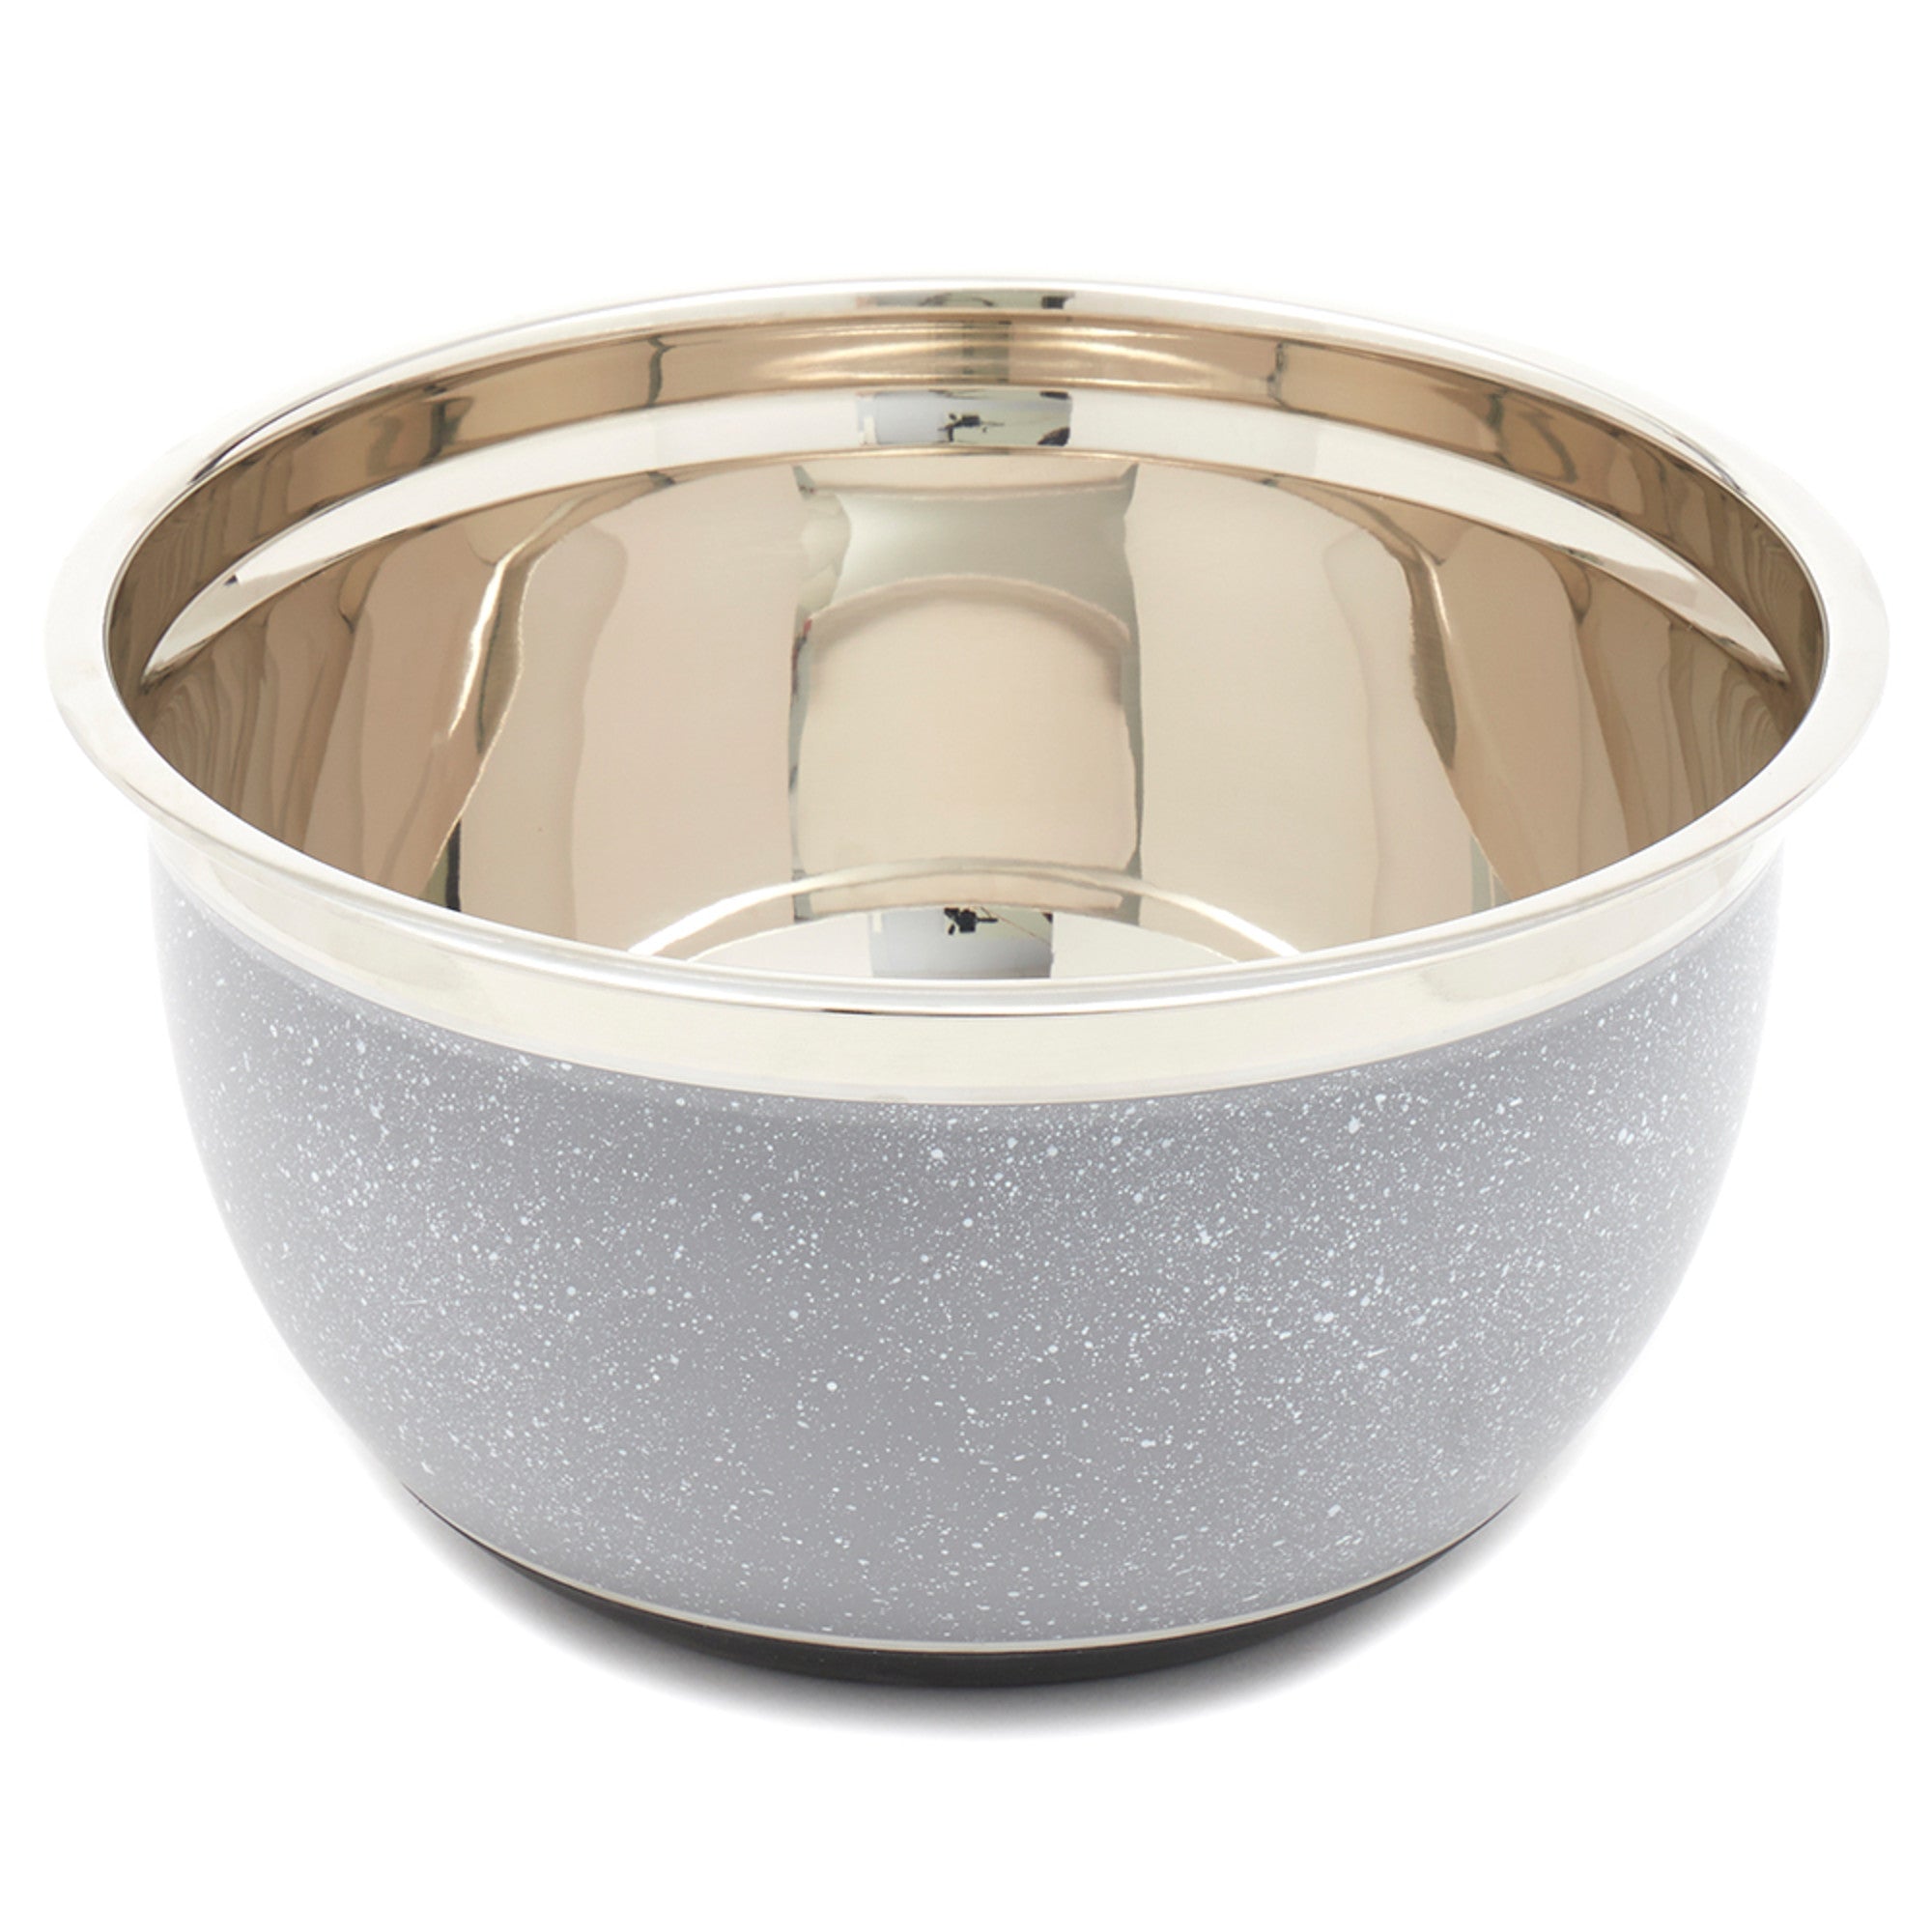 Home Basics Speckled 5 Qt Stainless Steel Mixing Bowl with Non-Skid Bottom - Assorted Colors